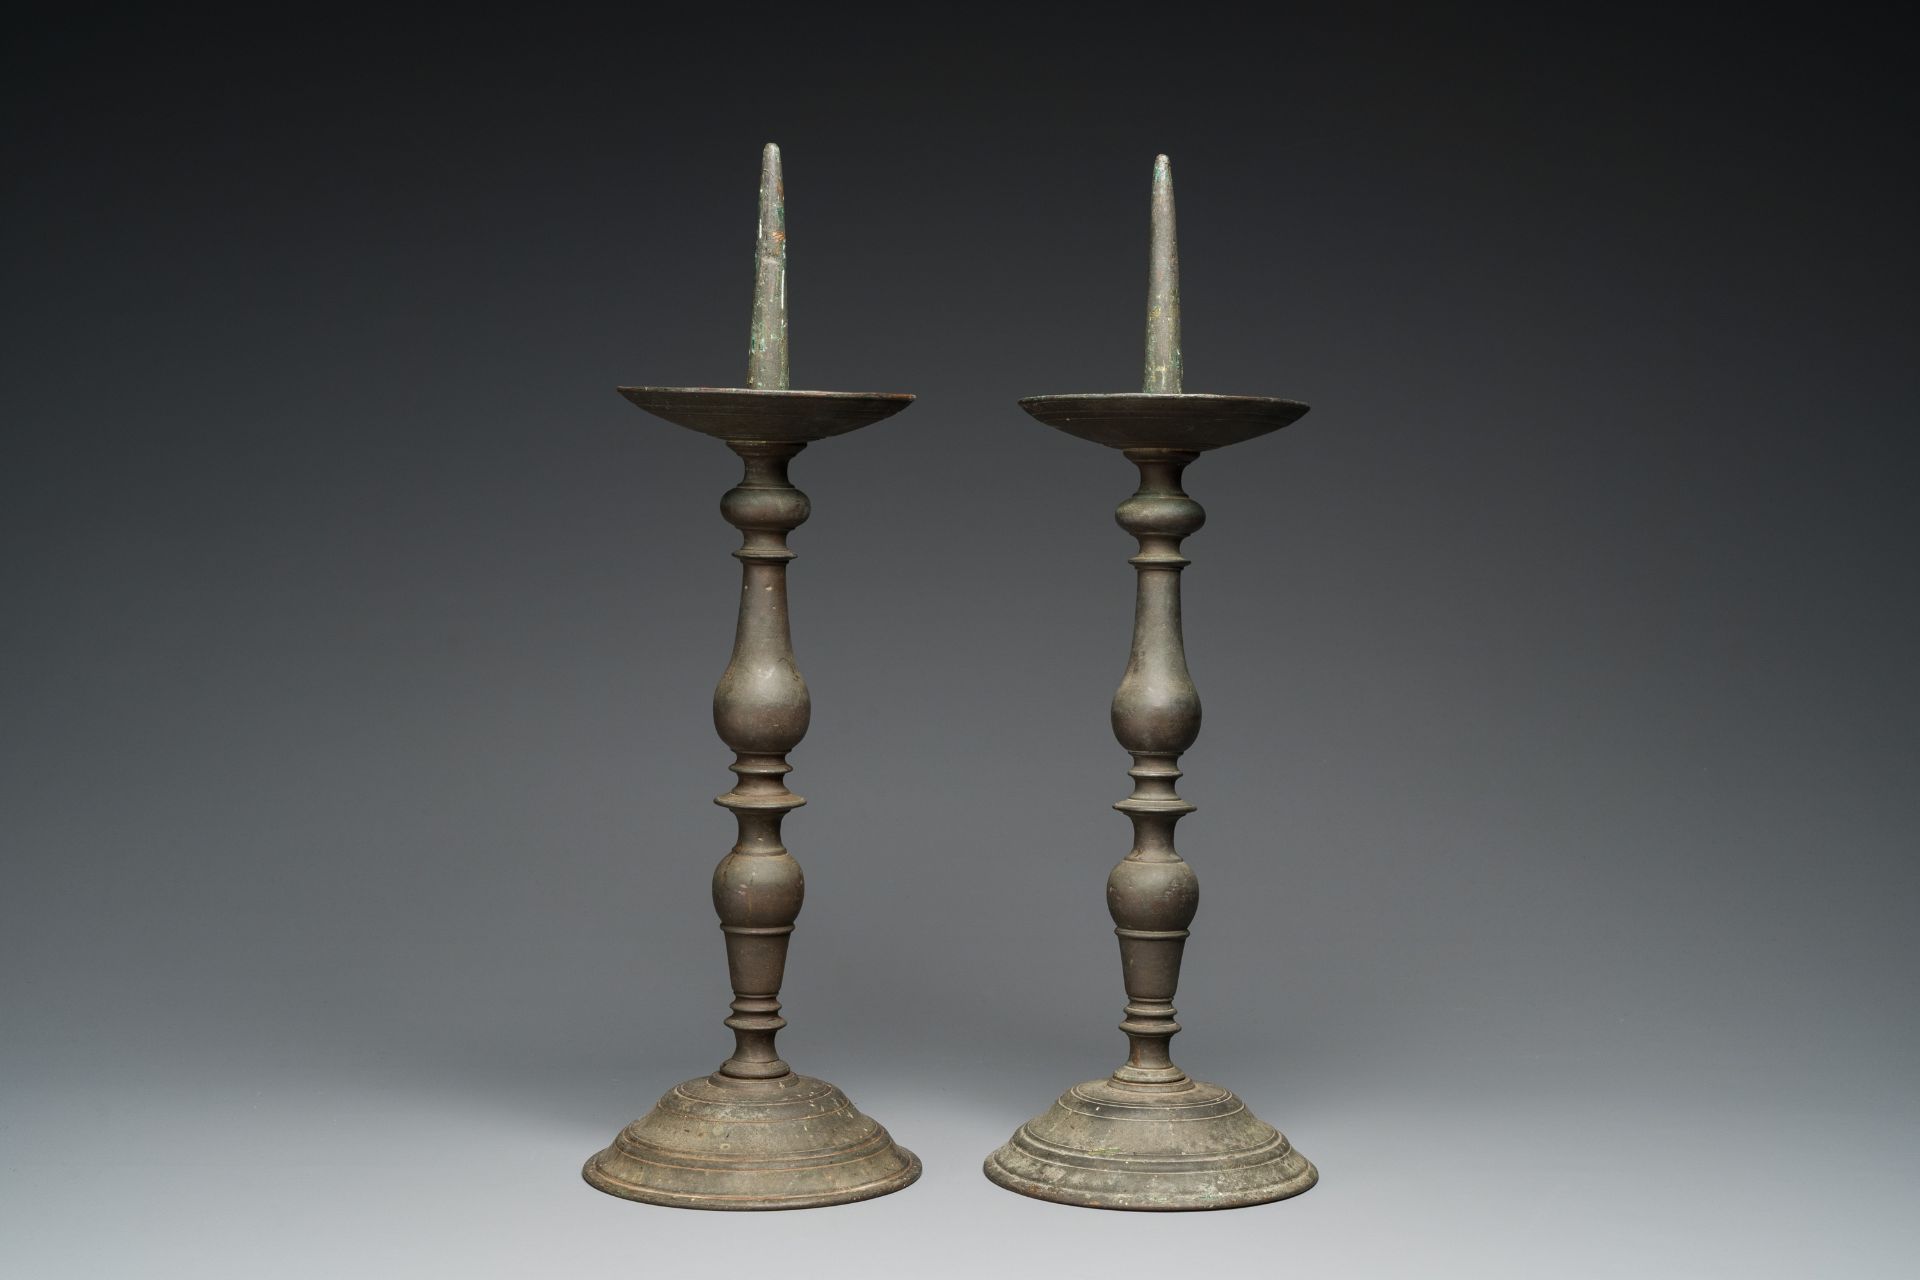 A pair of patinated bronze pricket candlesticks, France, 17th C. - Image 2 of 7